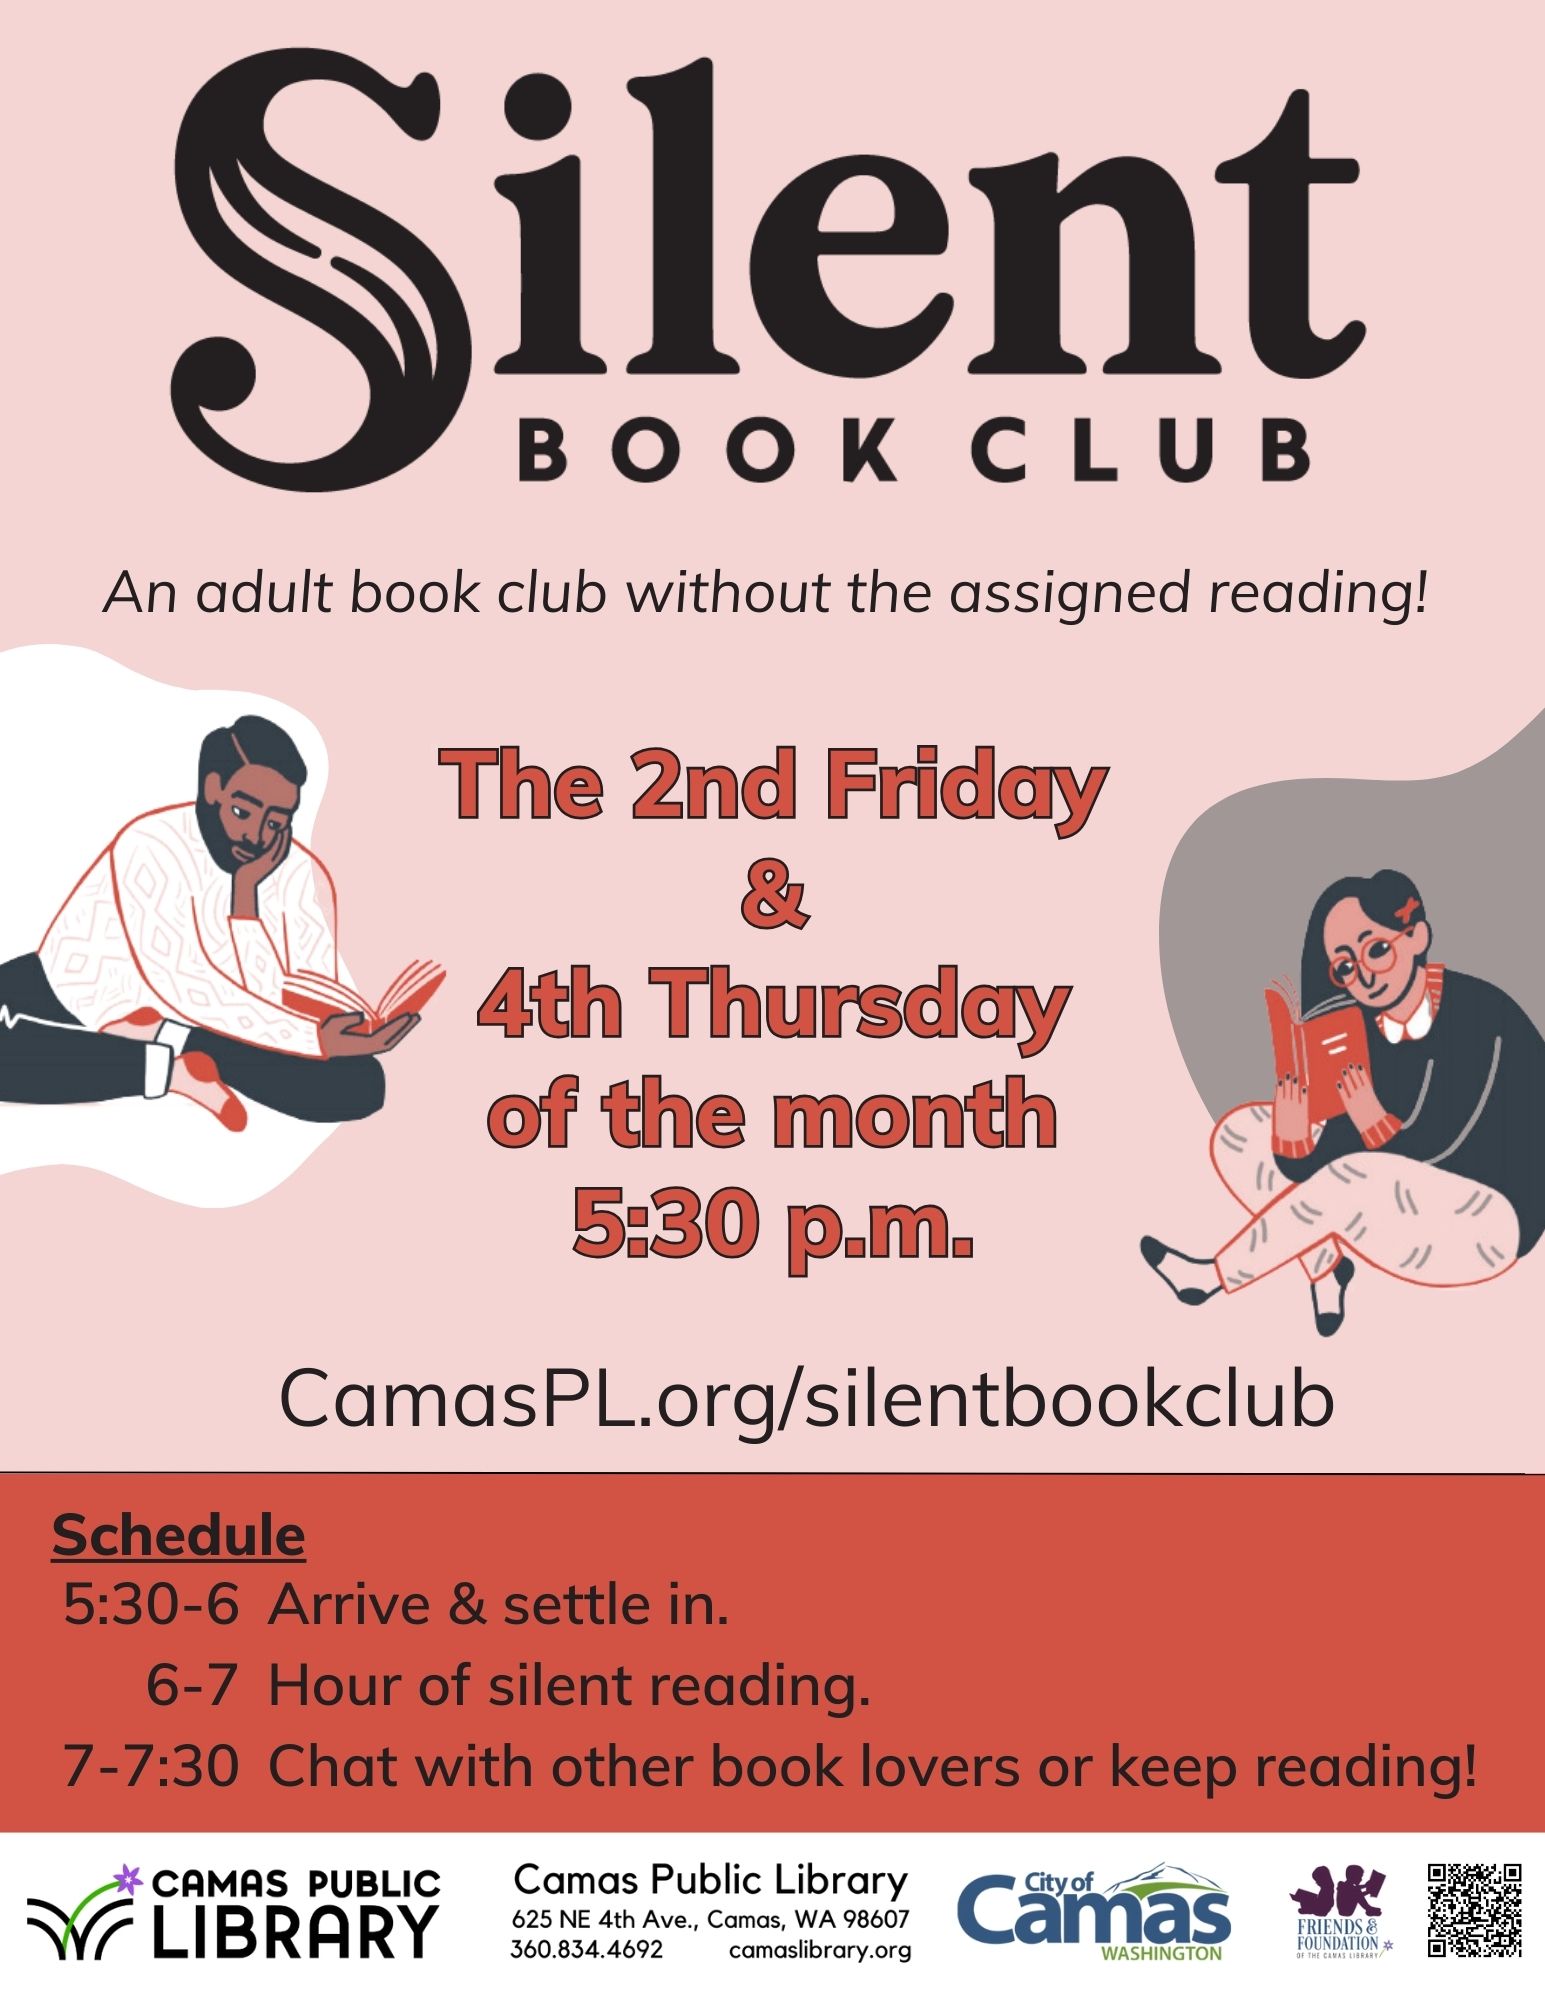 Silent Book Club – Events